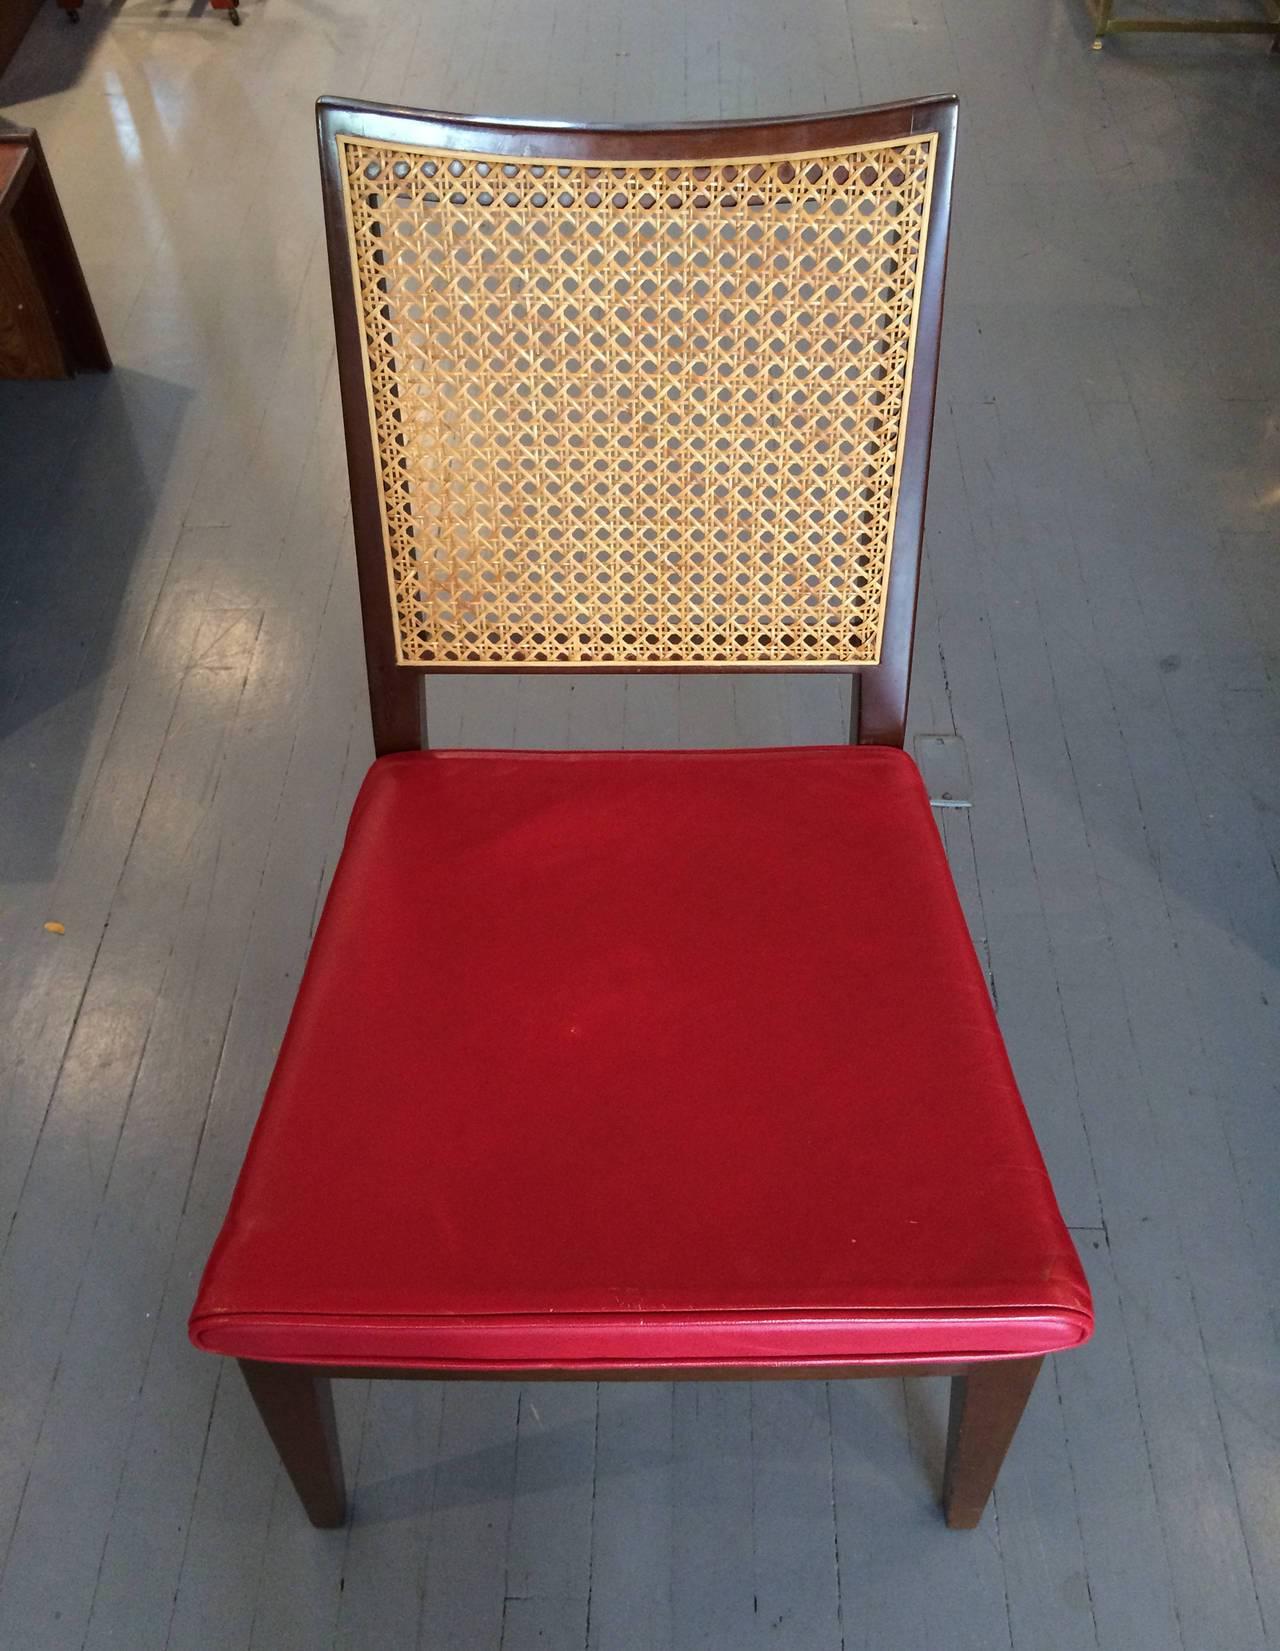 A pair of walnut side chairs by Edward Wormley for Dunbar. Red leather cushion on solid wood seat with slightly curved caned back. Simple and elegant form with a Japanese sensibility. One of the chair still retains Dunbar brass tags underneath as